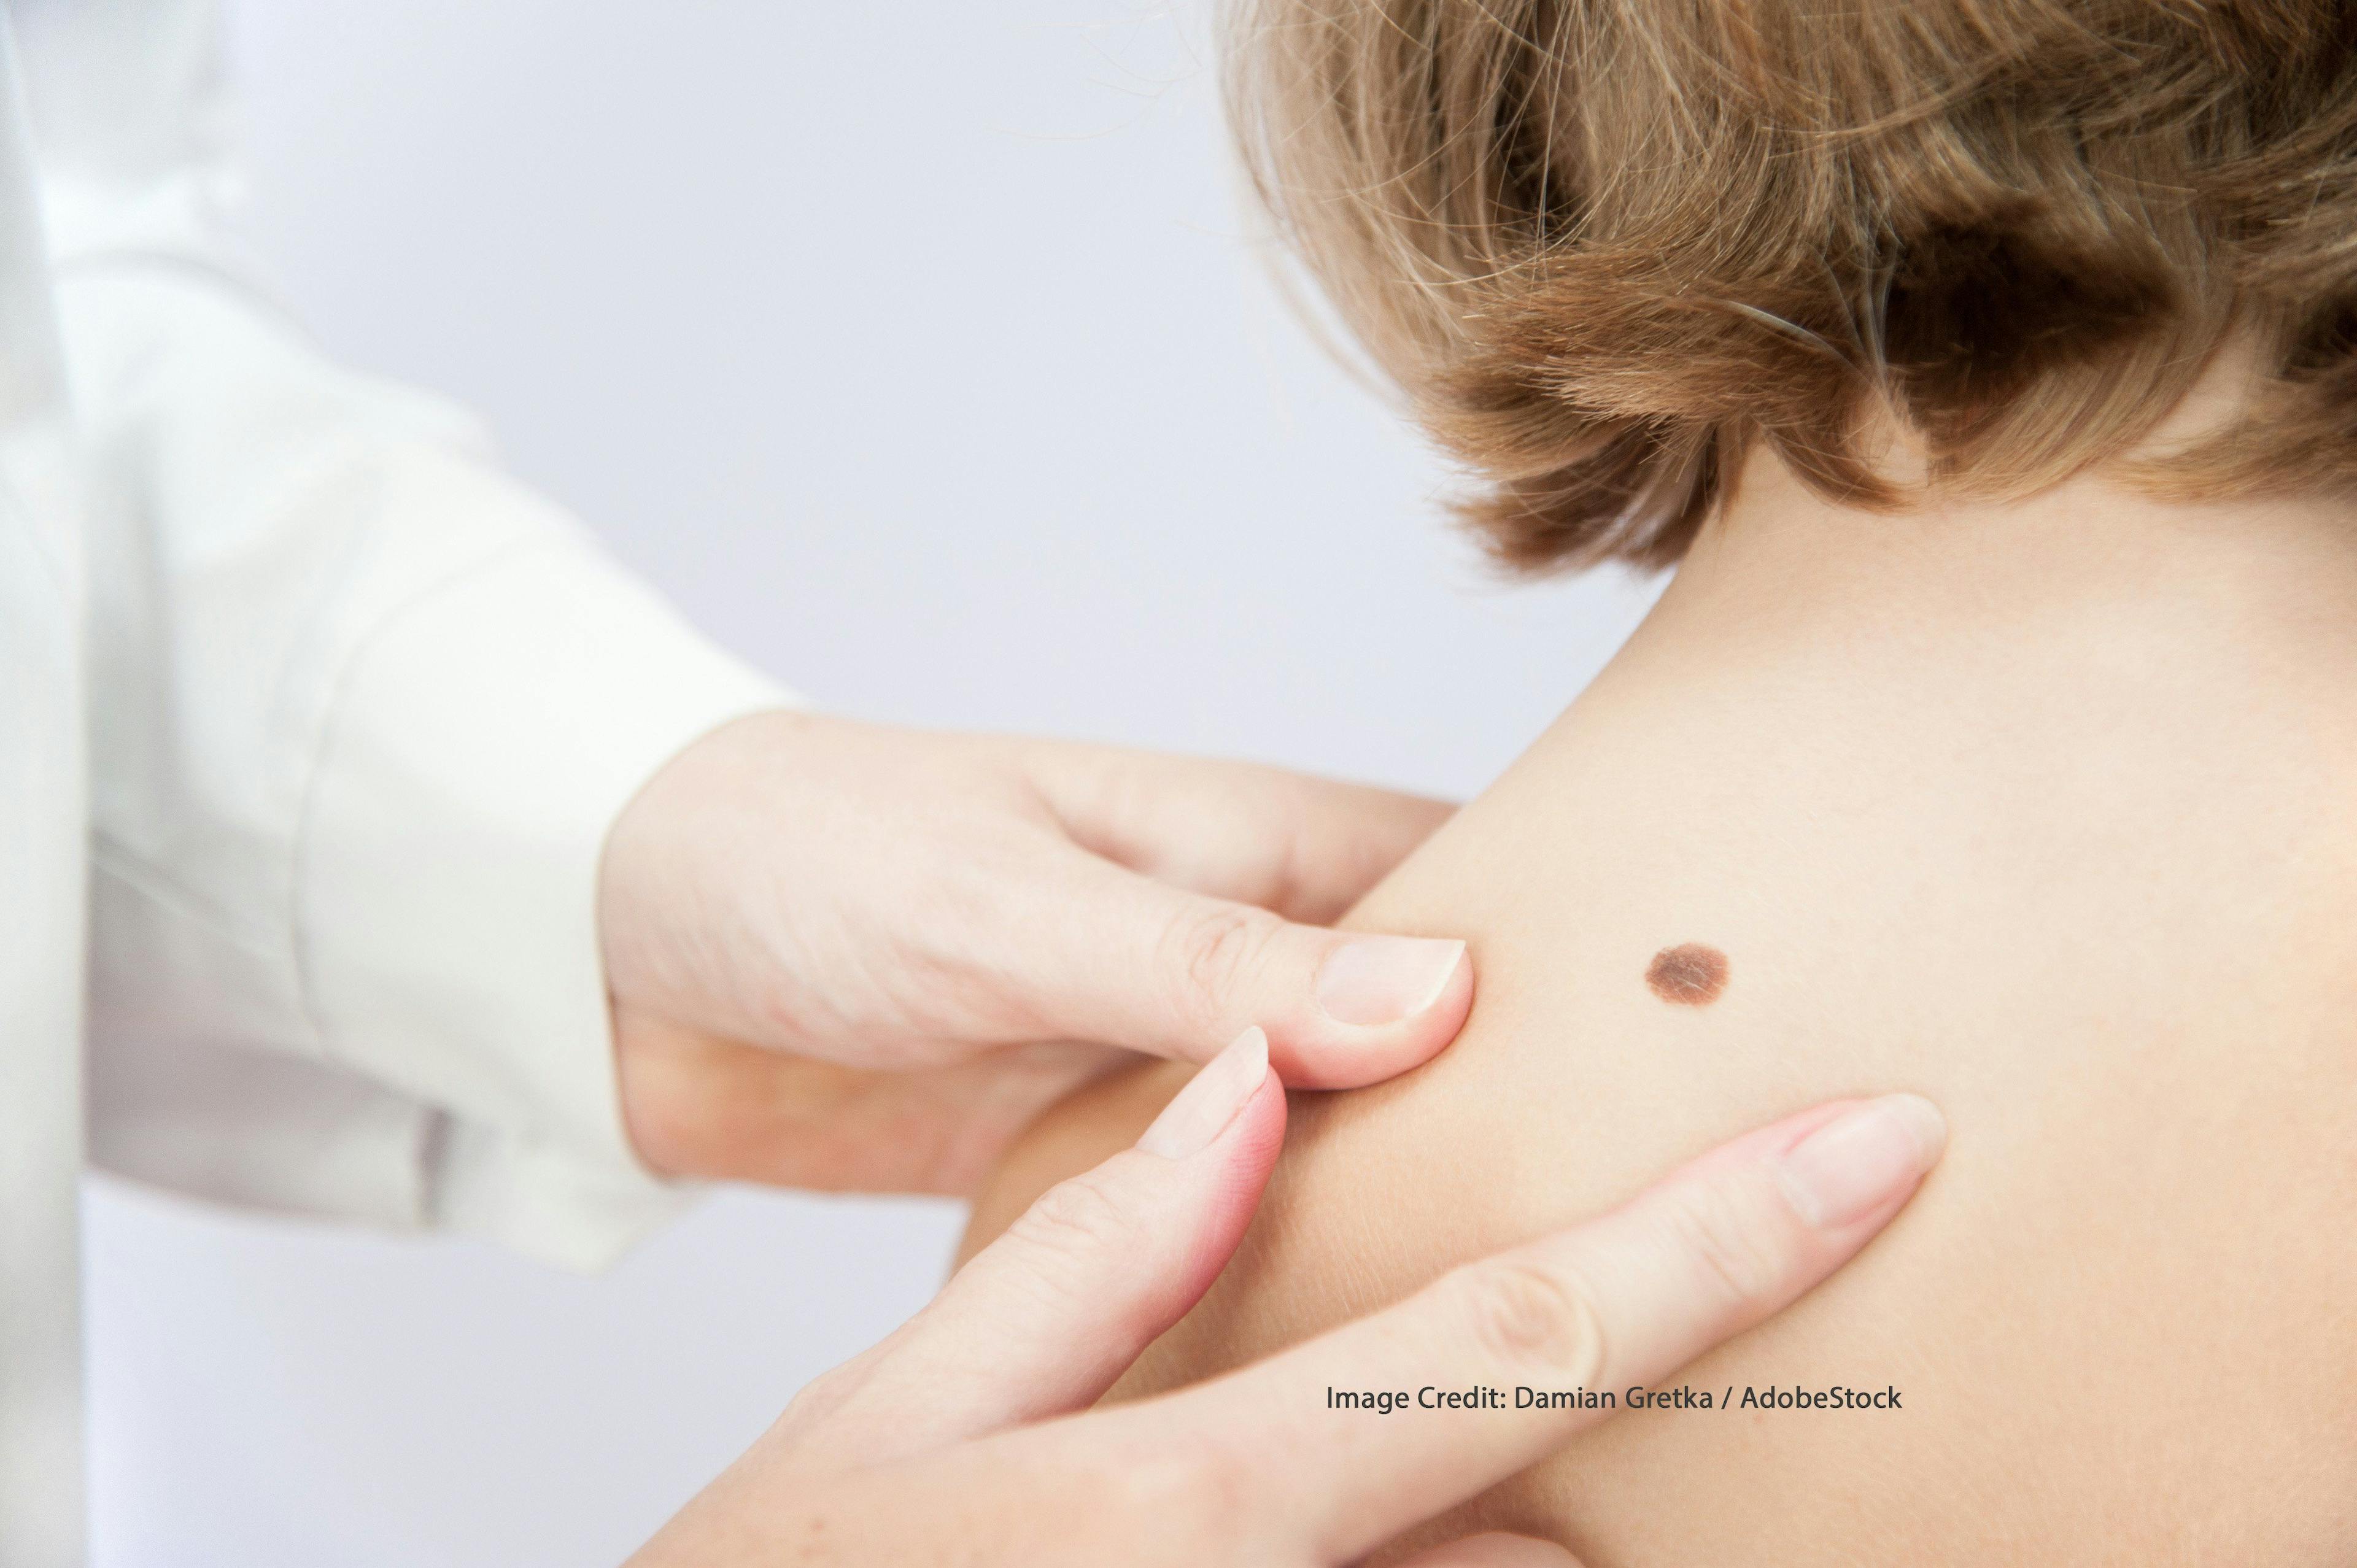 Researchers ID Common Terminology to Describe Non-Melanoma Skin Cancers